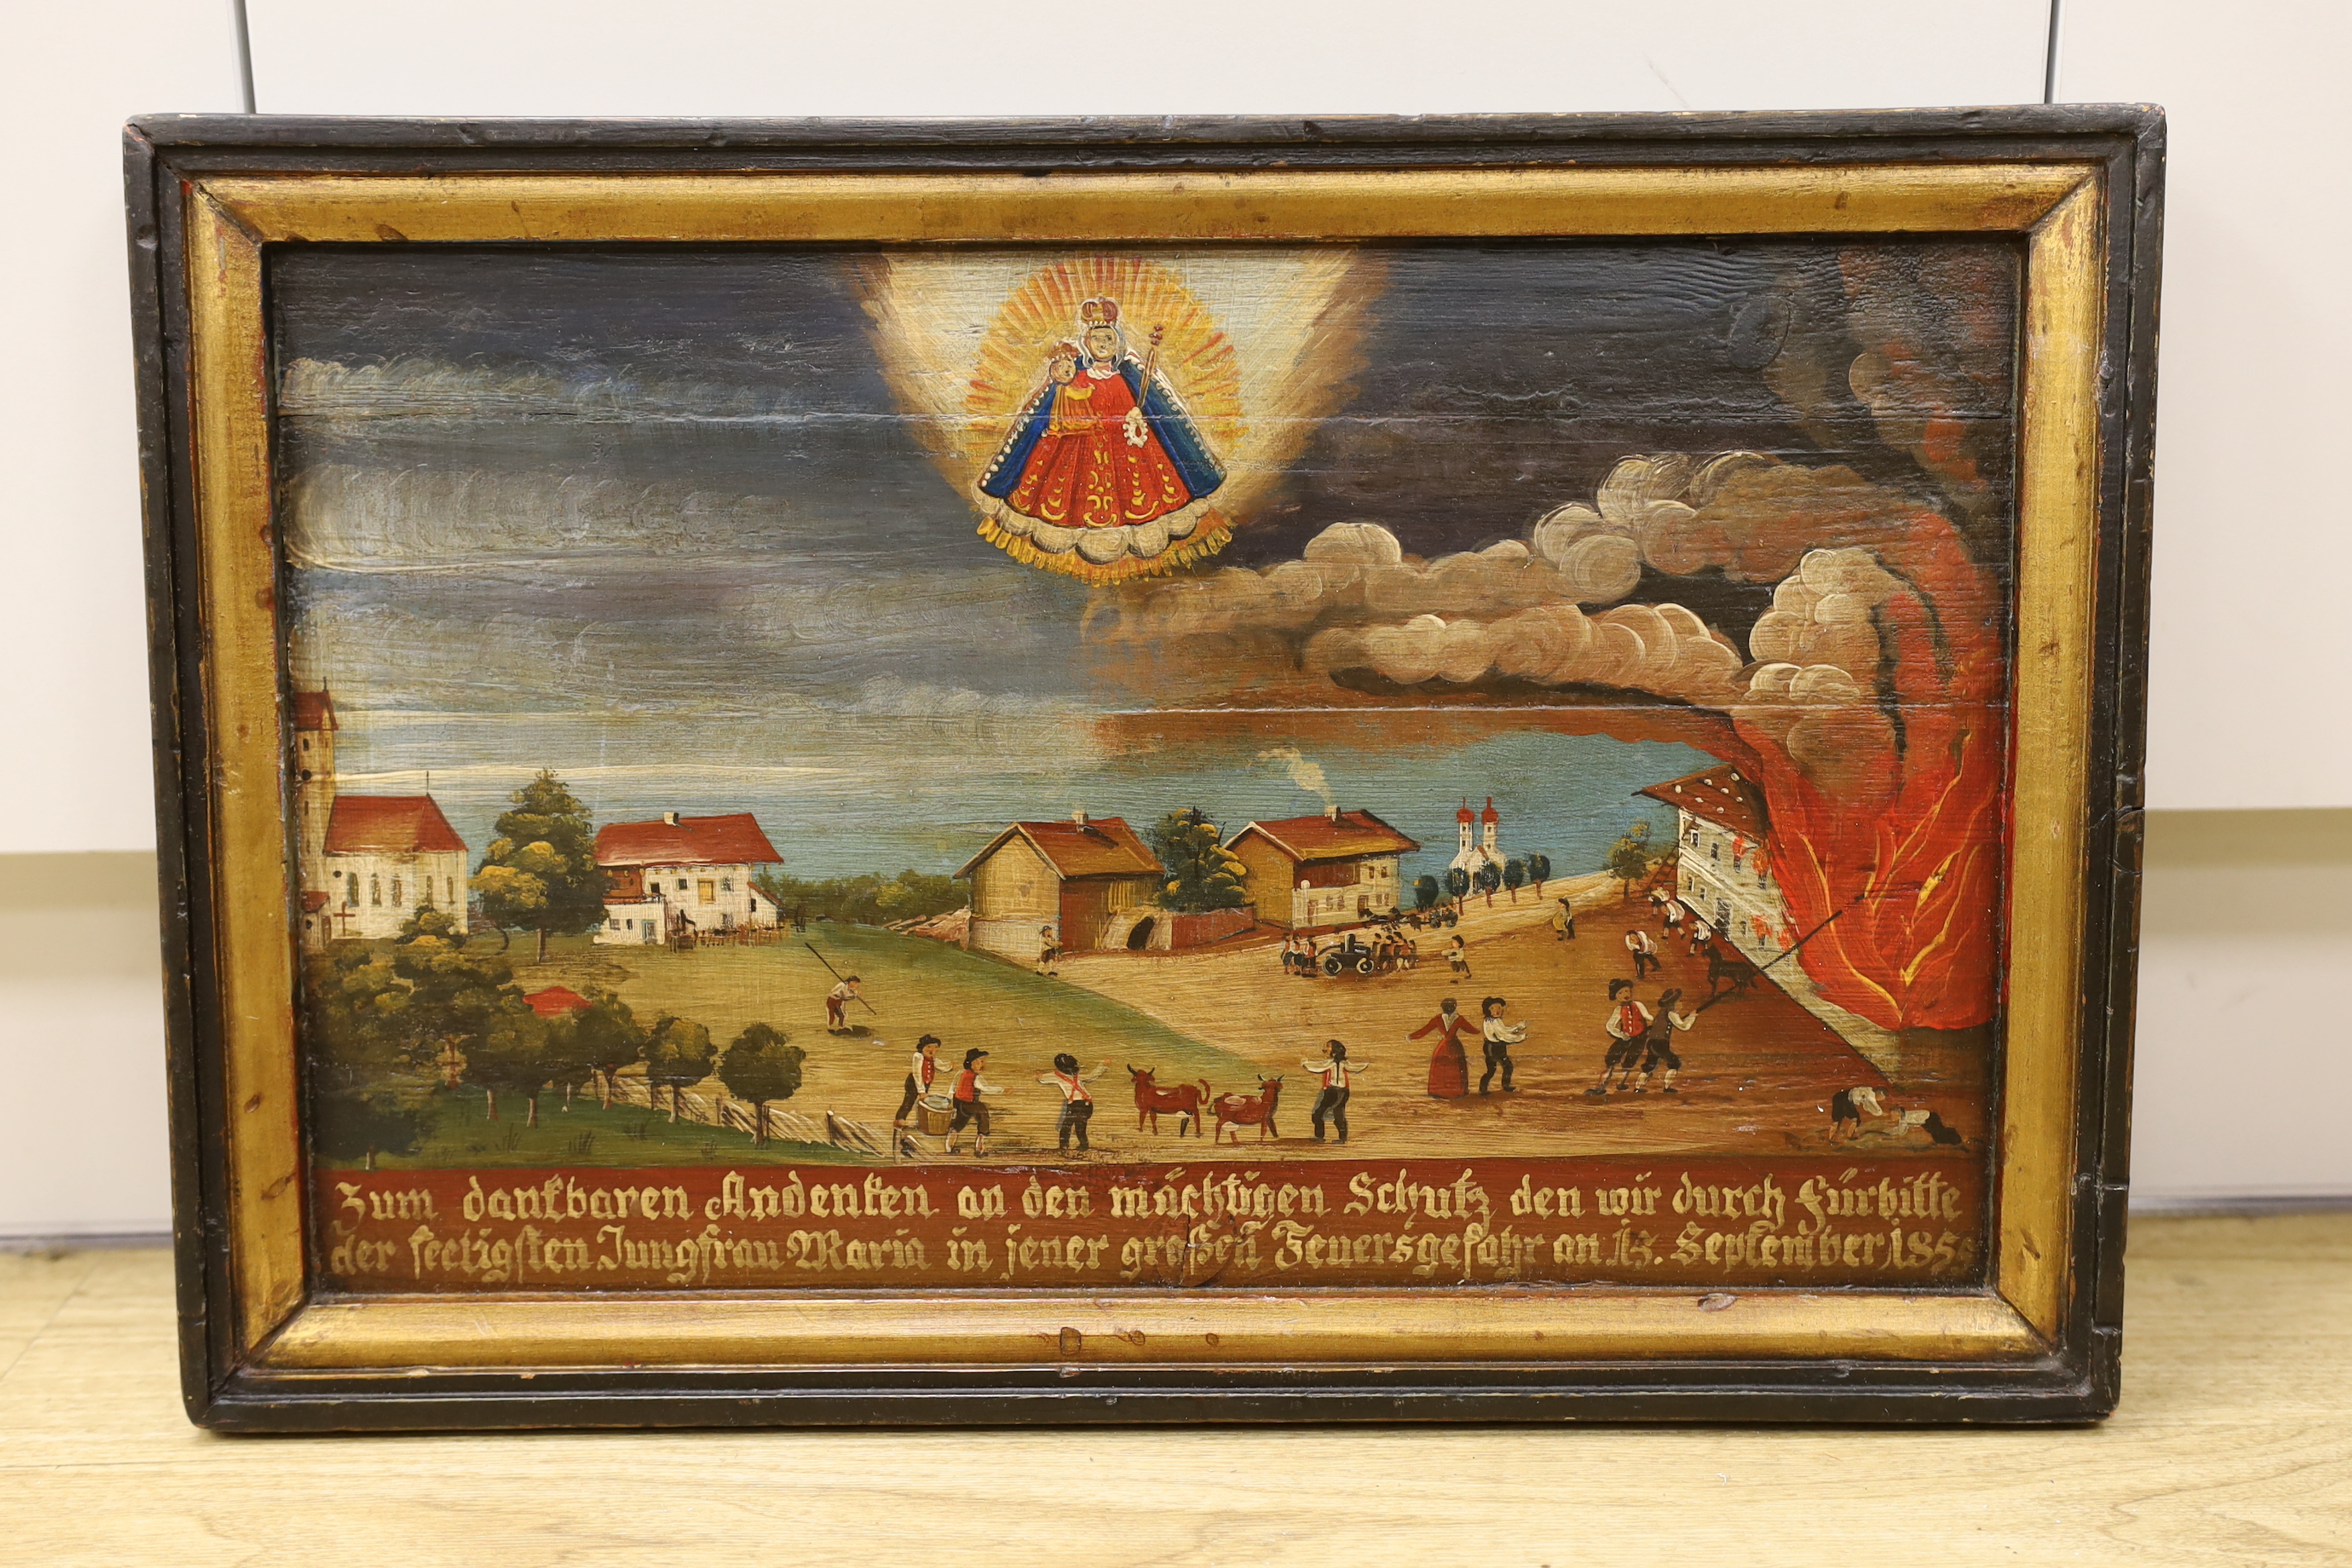 19th century German School, oil on board, Folklore scene with burning building and inscription, dated 1855, 47 x 29cm